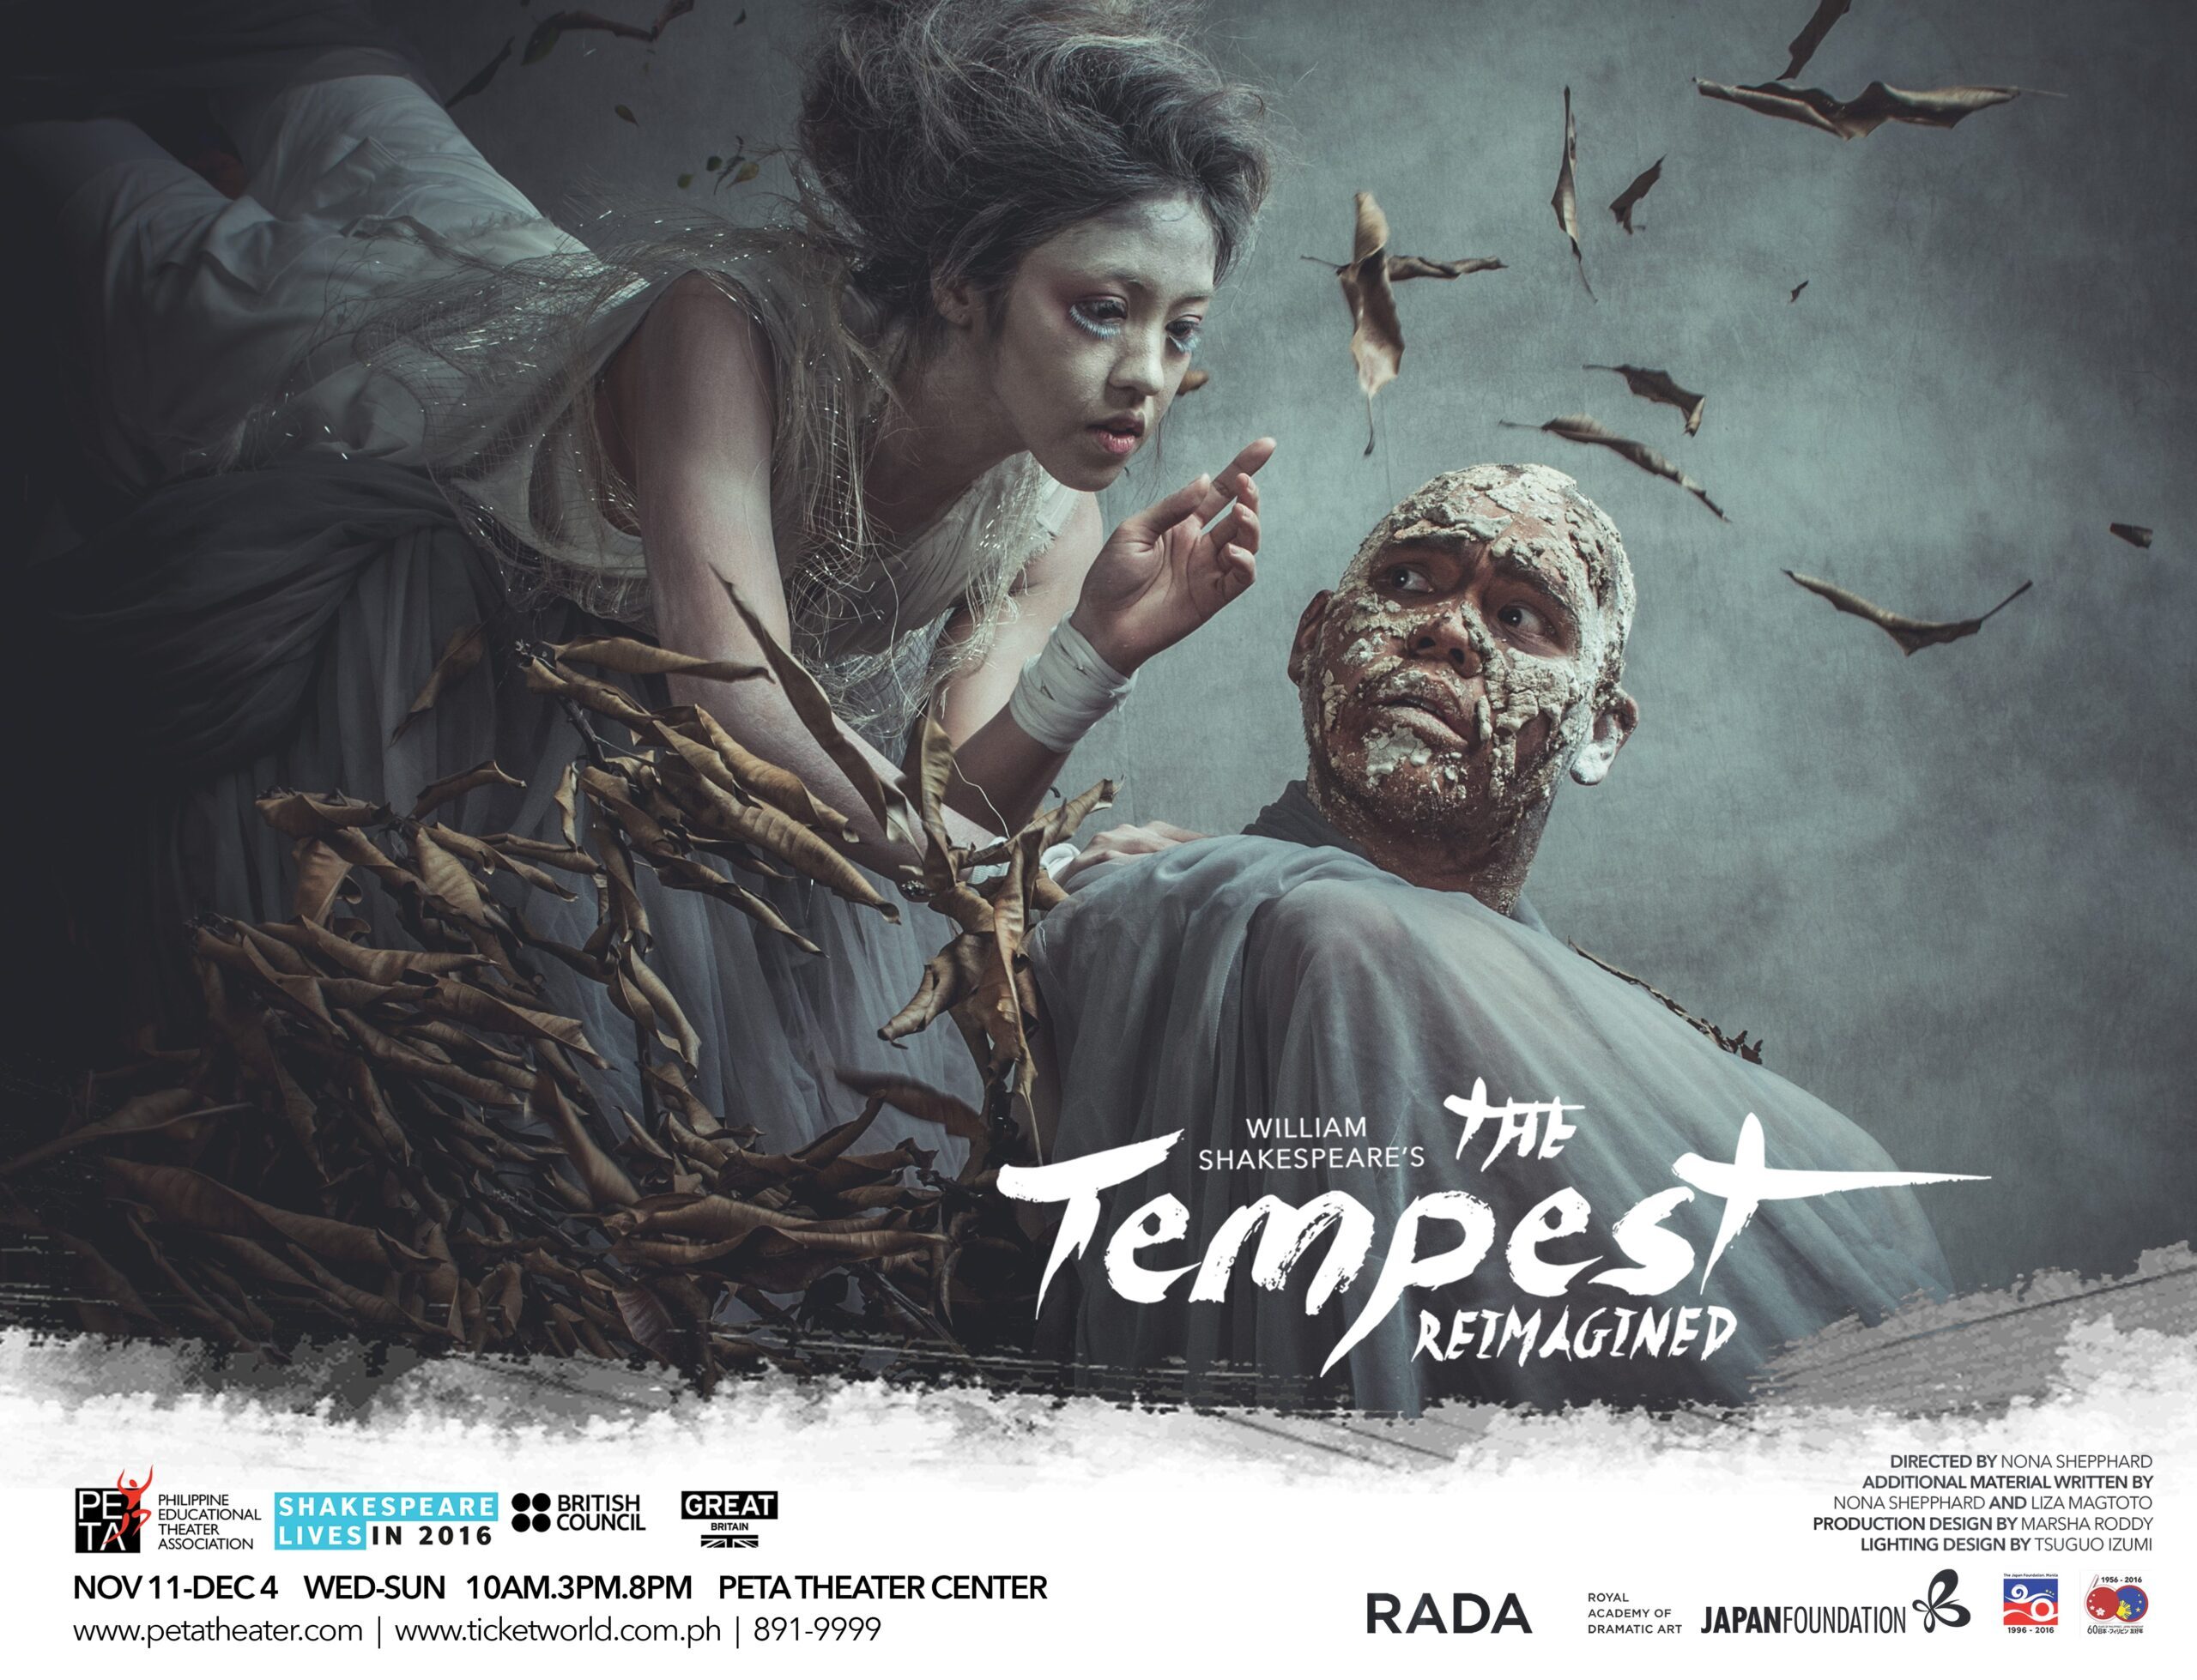 Love among the ruins: ‘The Tempest Reimagined’